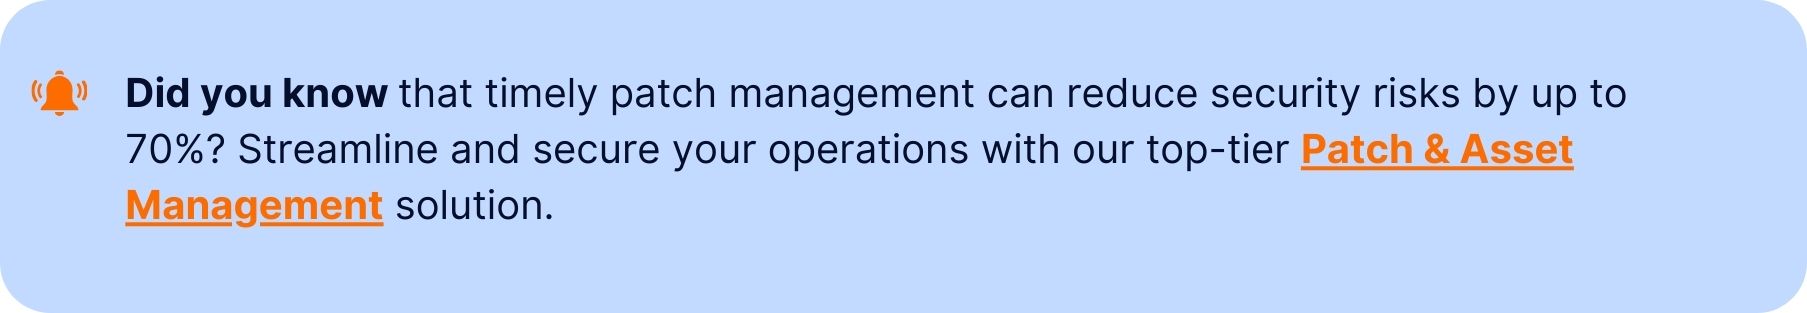 Callout box with a fact: "Did you know that timely patch management can reduce security risks by up to 70%? Streamline and secure your operations with our top-tier Patch & Asset Management solution." The words "Patch & Asset Management" are hyperlinked.